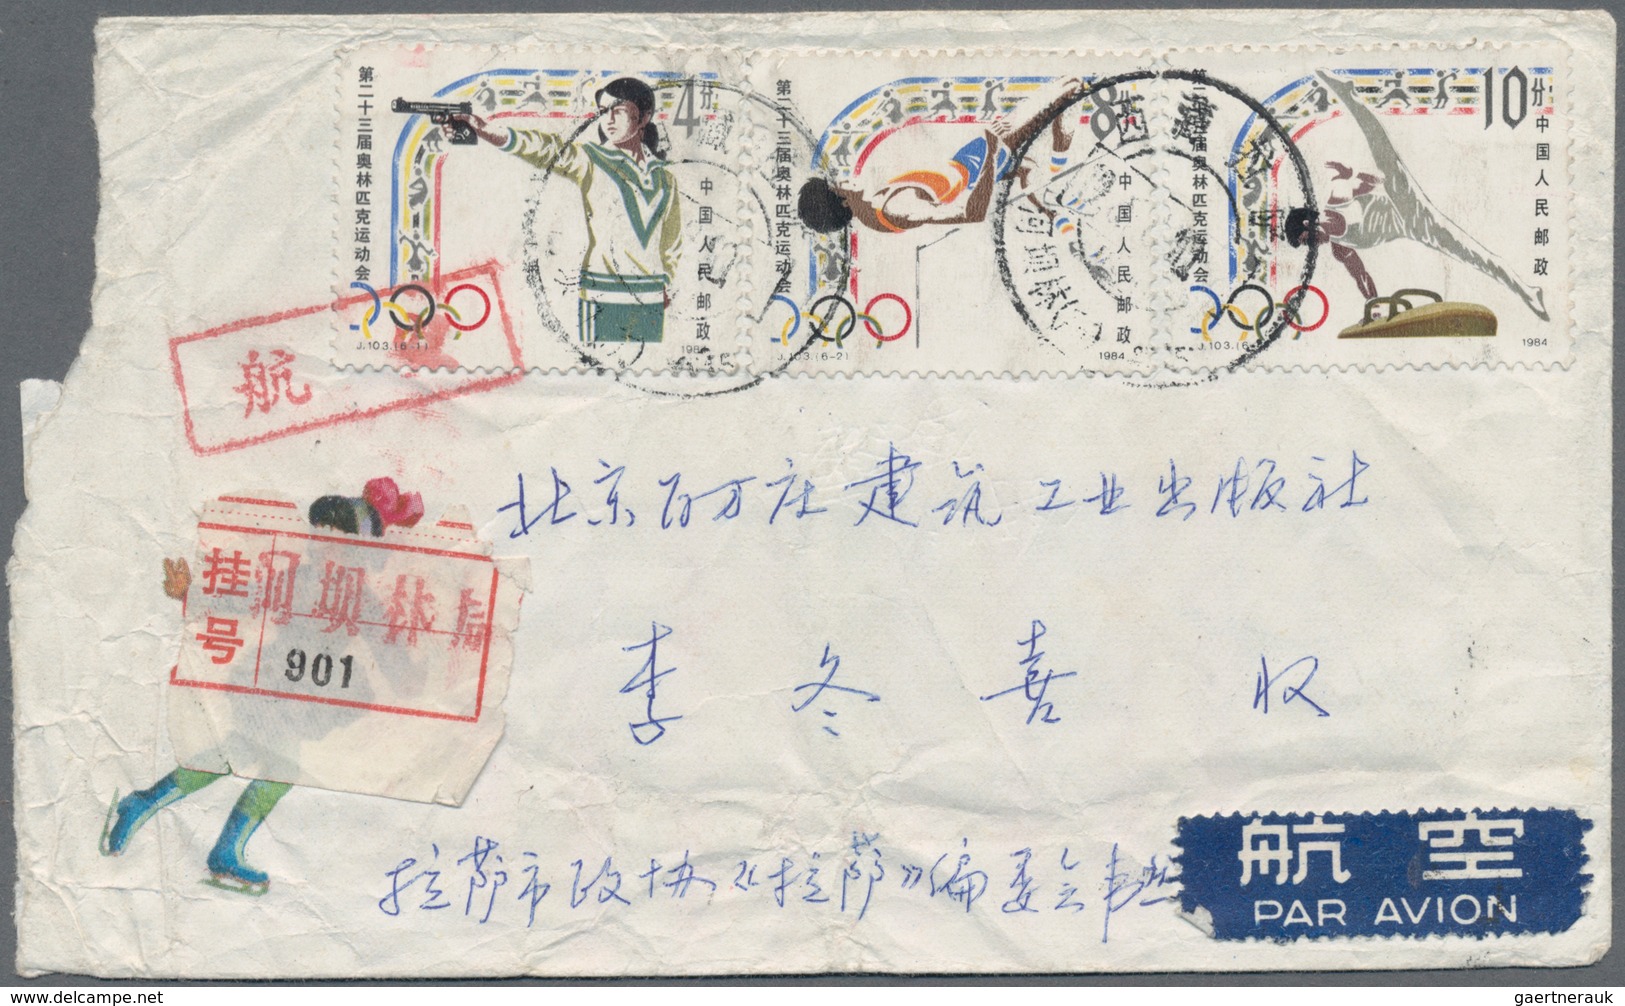 China - Besonderheiten: 1956/2003, used in Tibet, covers (30), used ppc (5) with bilingual postmarks